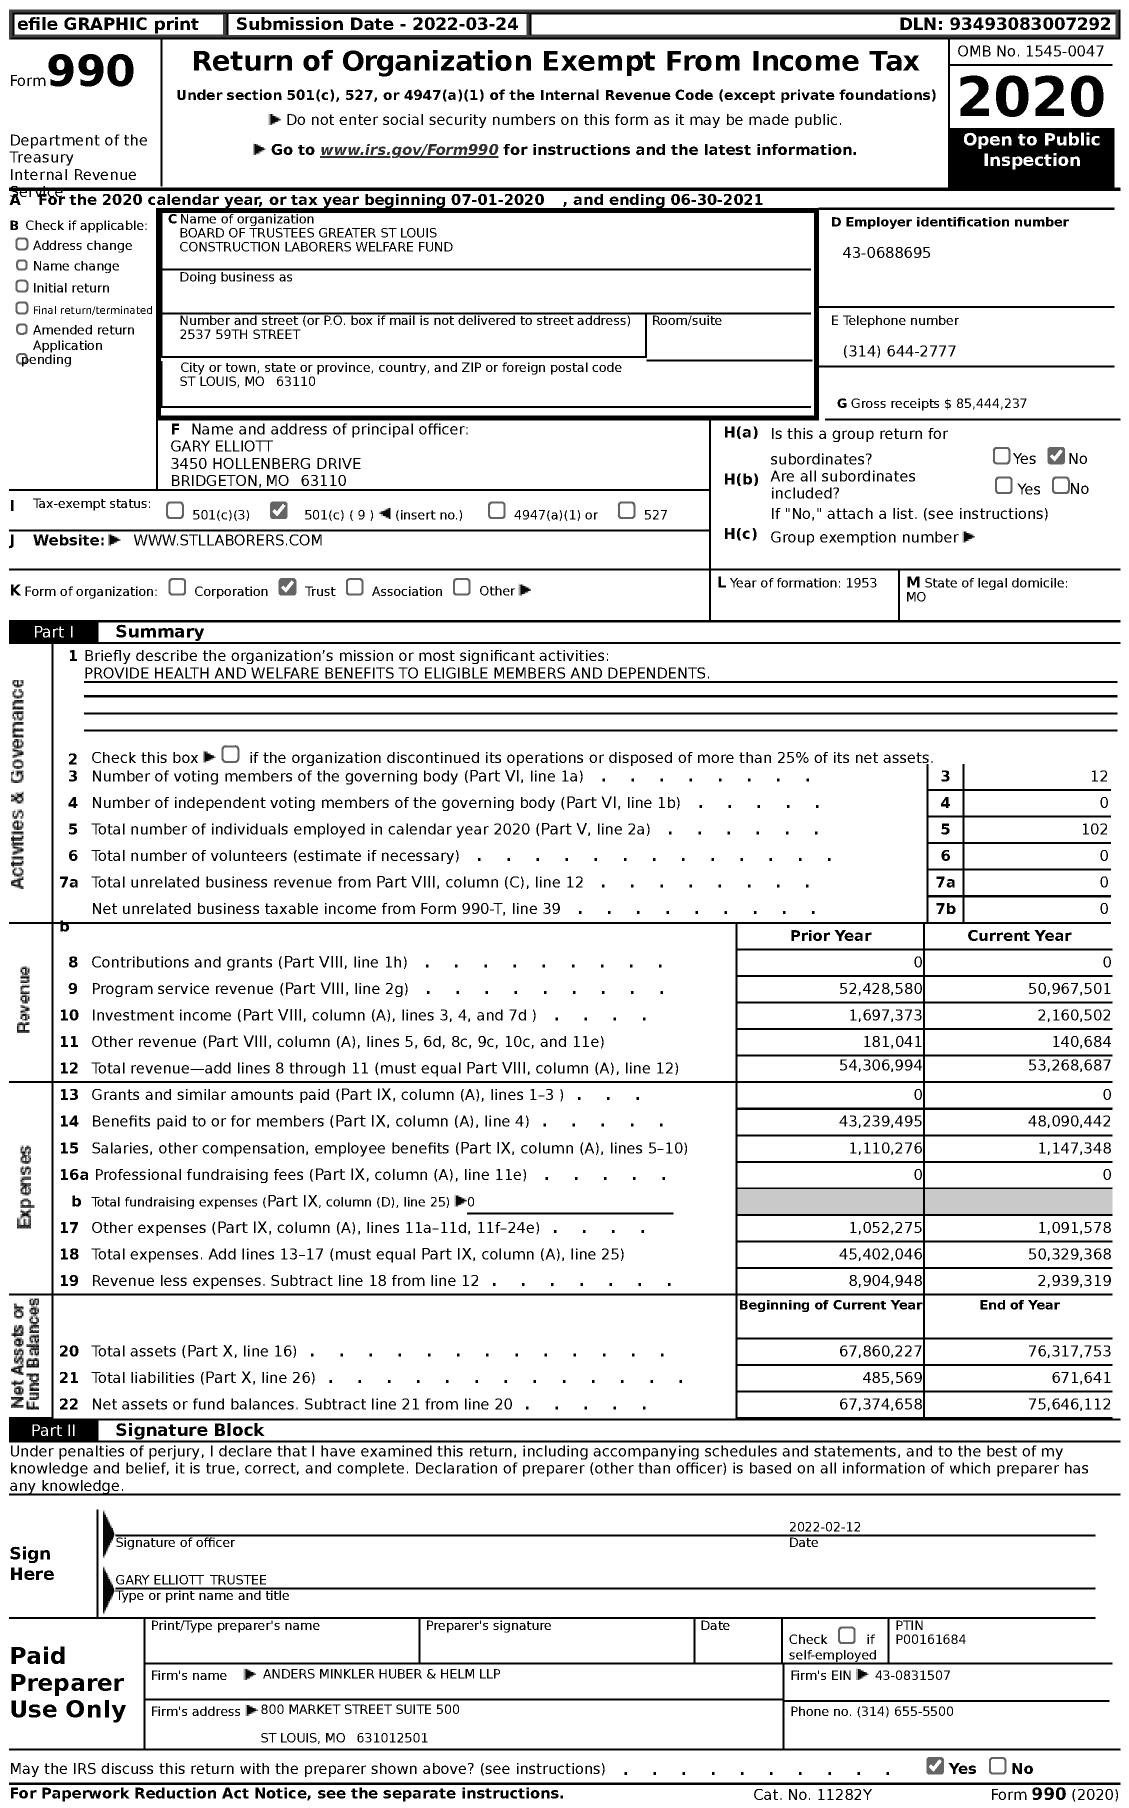 Image of first page of 2020 Form 990 for Board of Trustees Greater St Louis Construction Laborers Welfare Fund